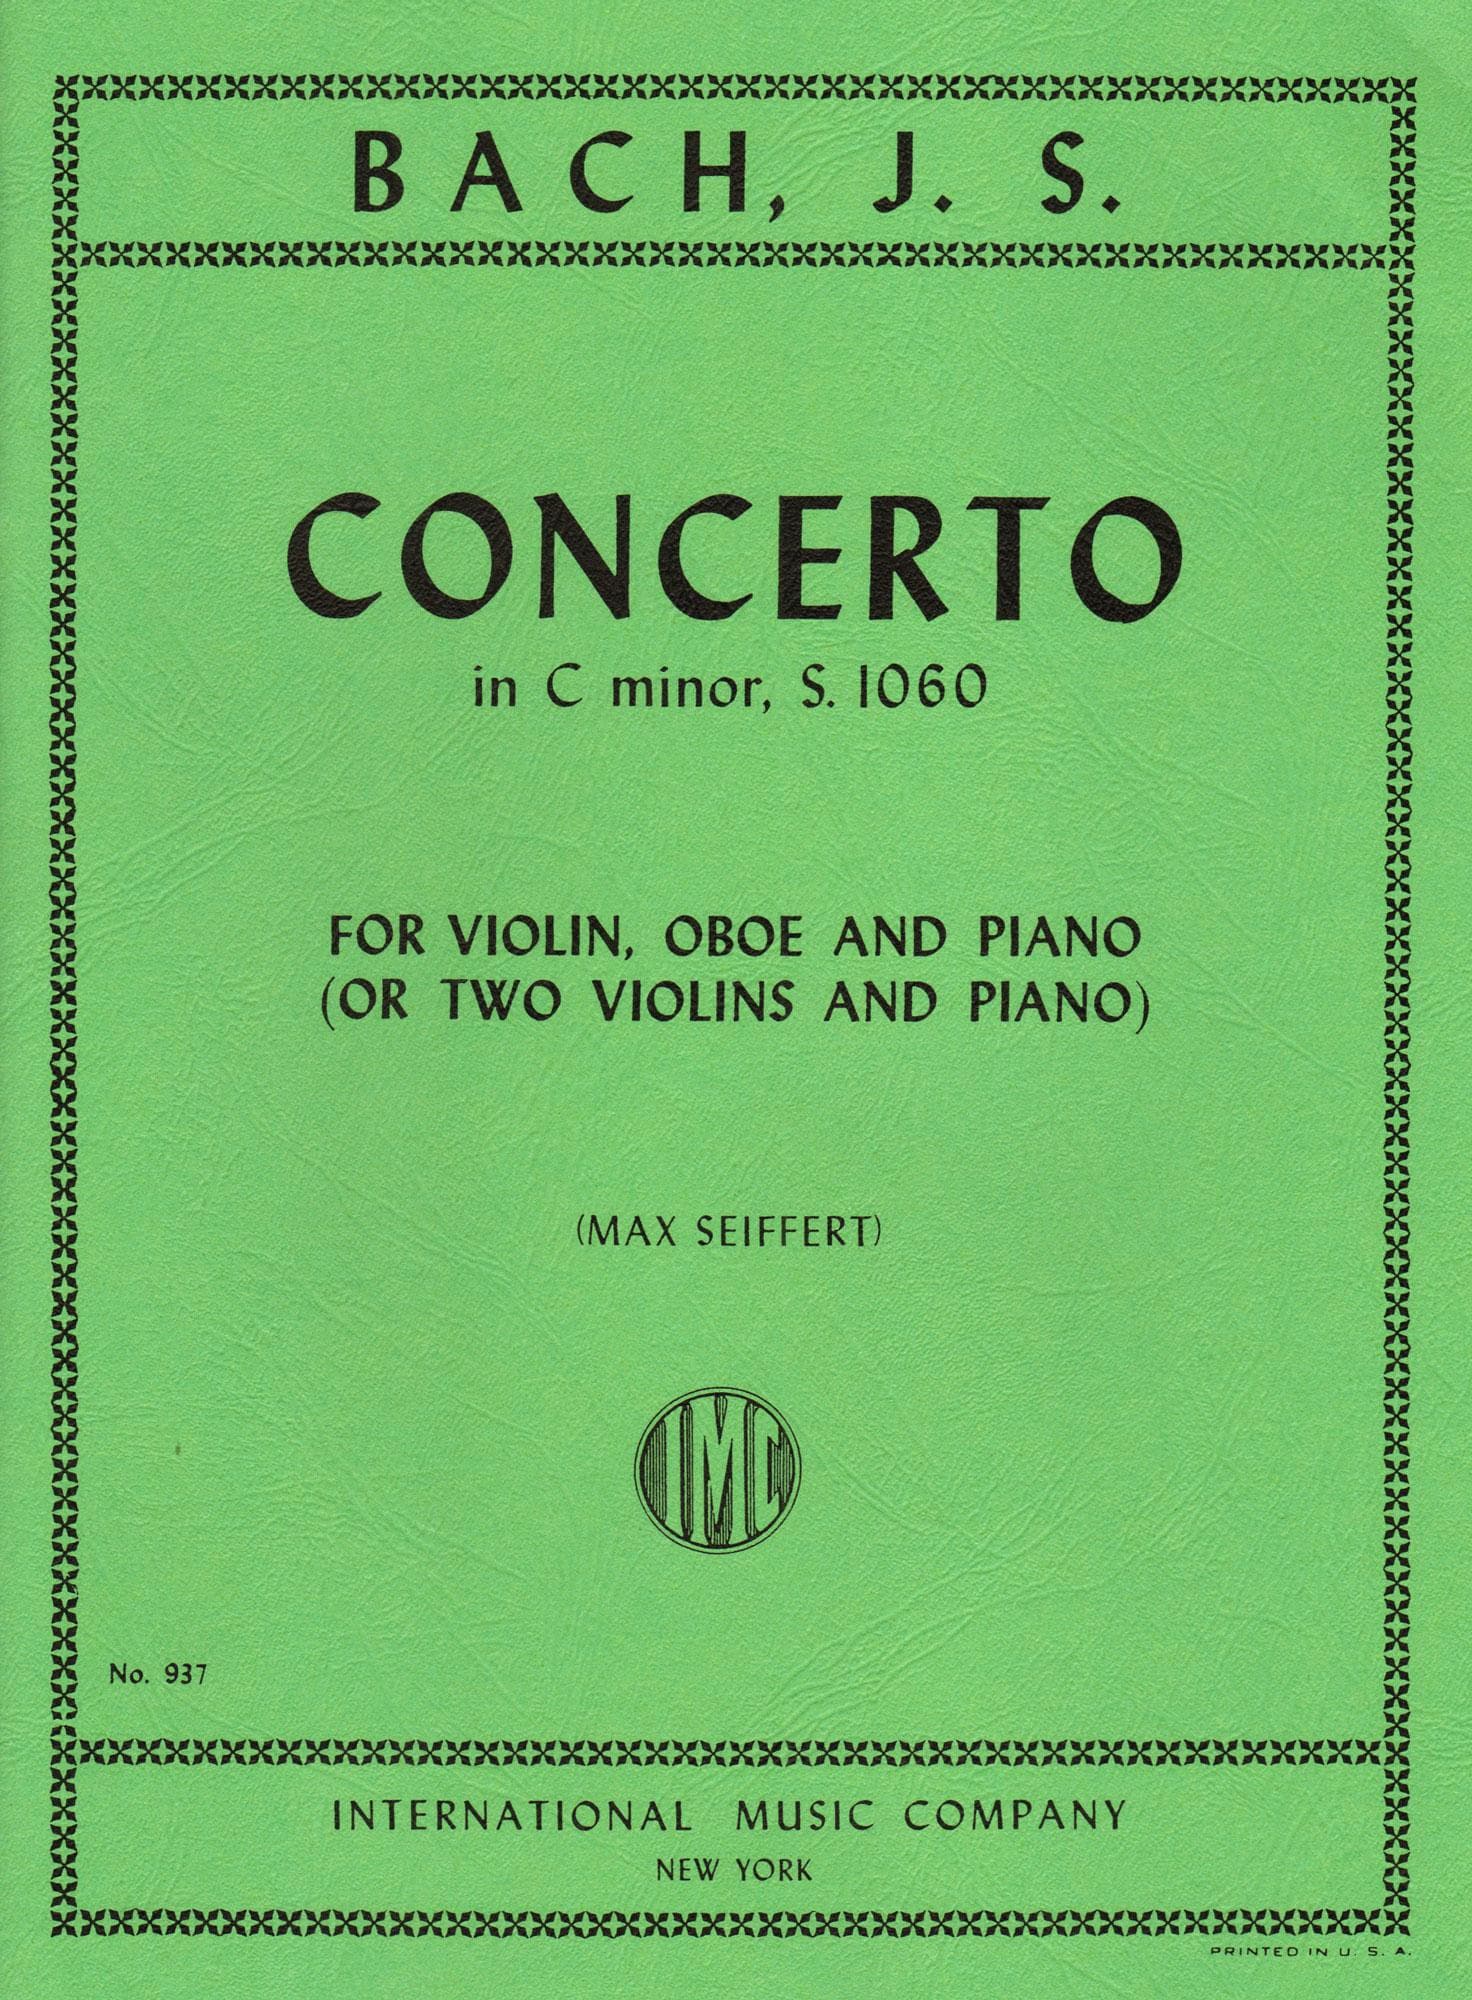 Bach, JS - Concerto in c minor, BWV 1060R - Violin, Oboe, and Piano / Two Violins and Piano - edited by Max Seiffert - International Music Company